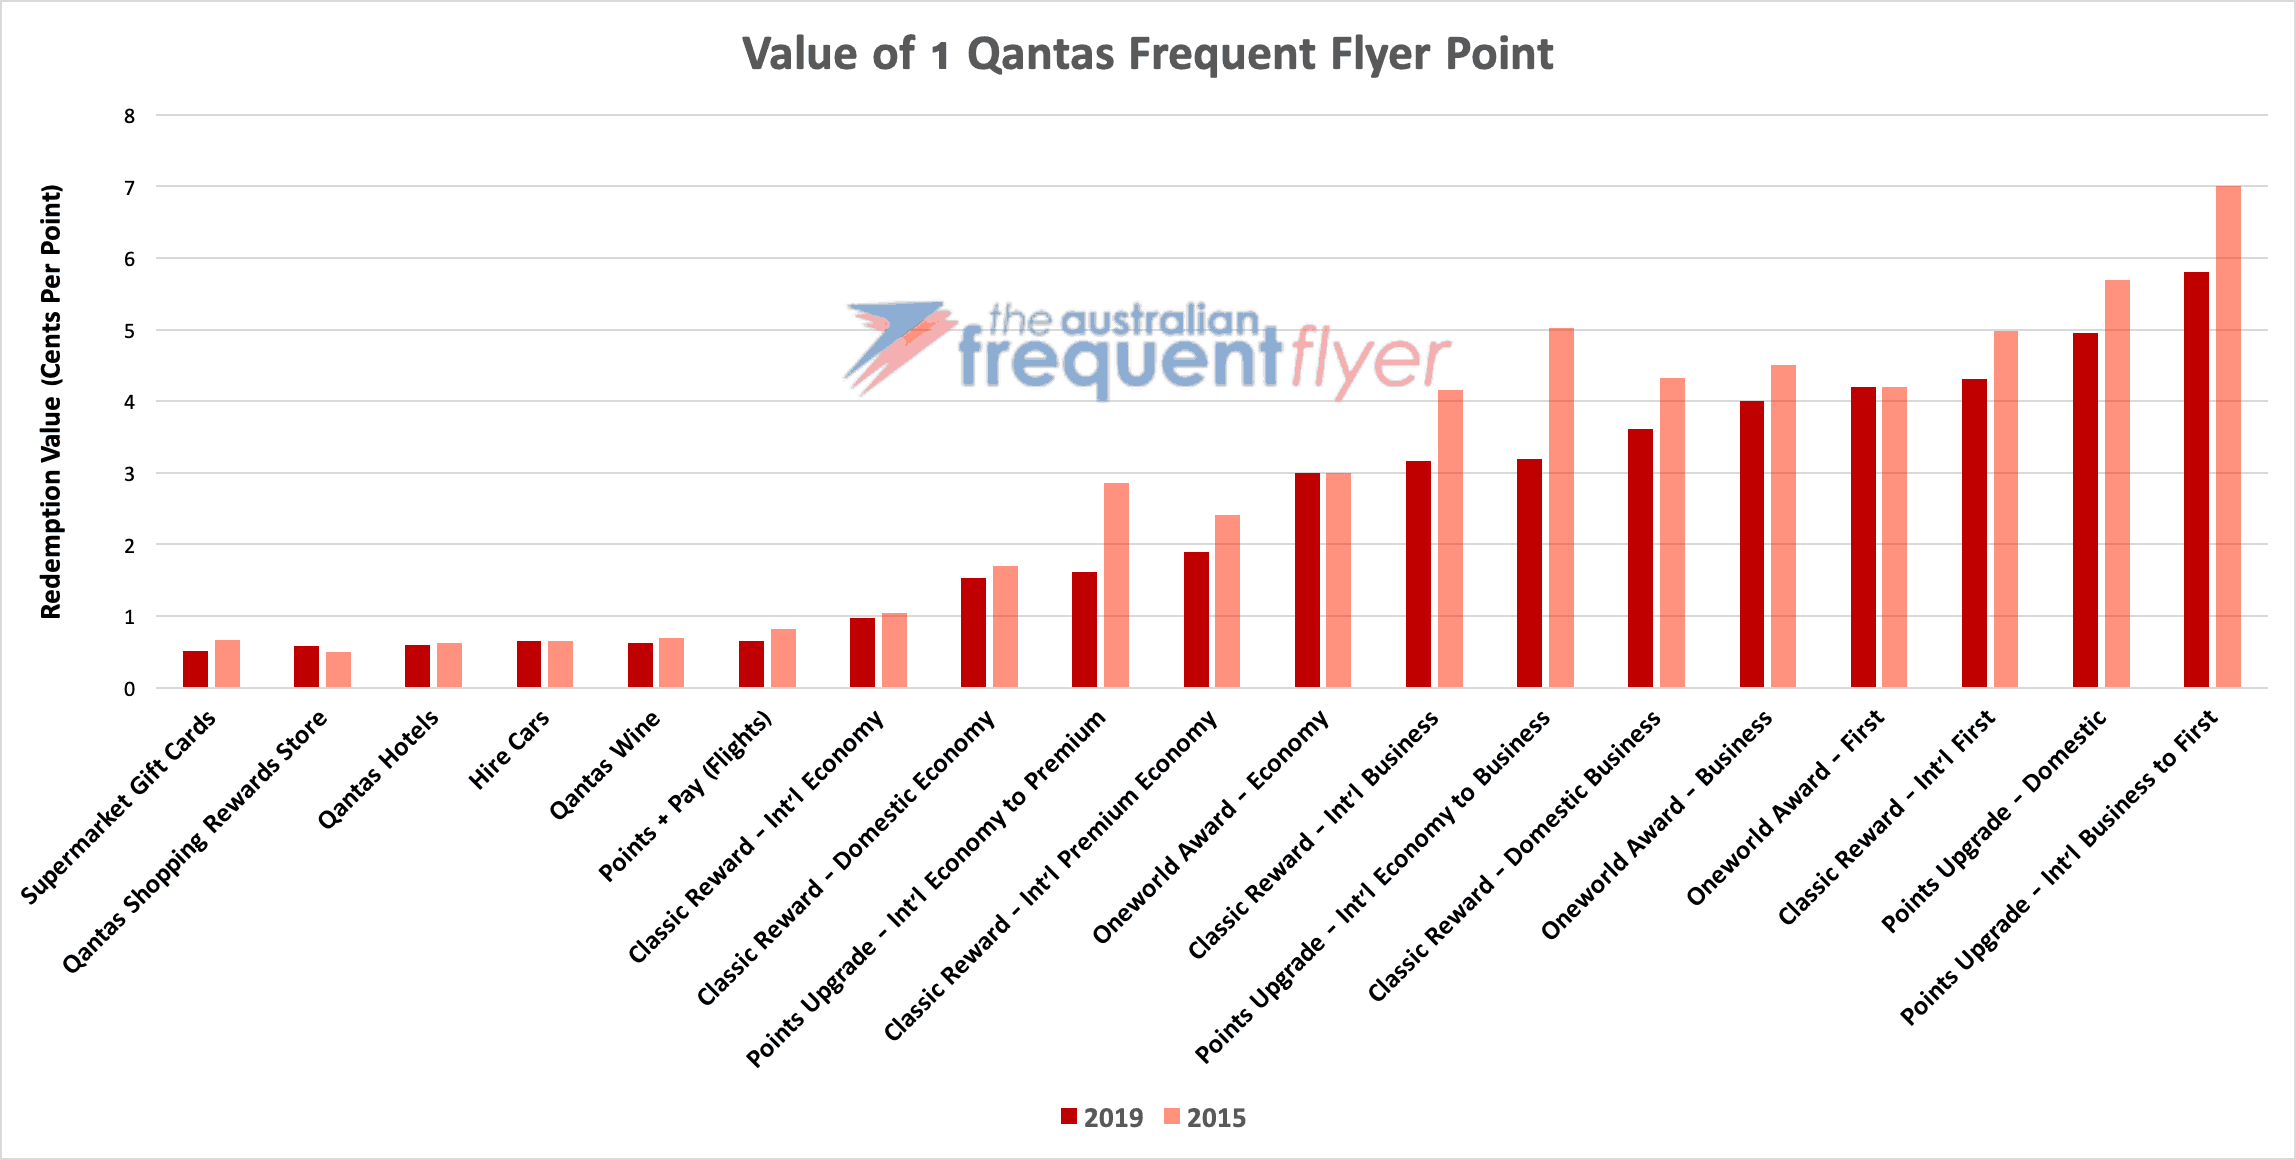 The value of a Qantas Frequent Flyer point